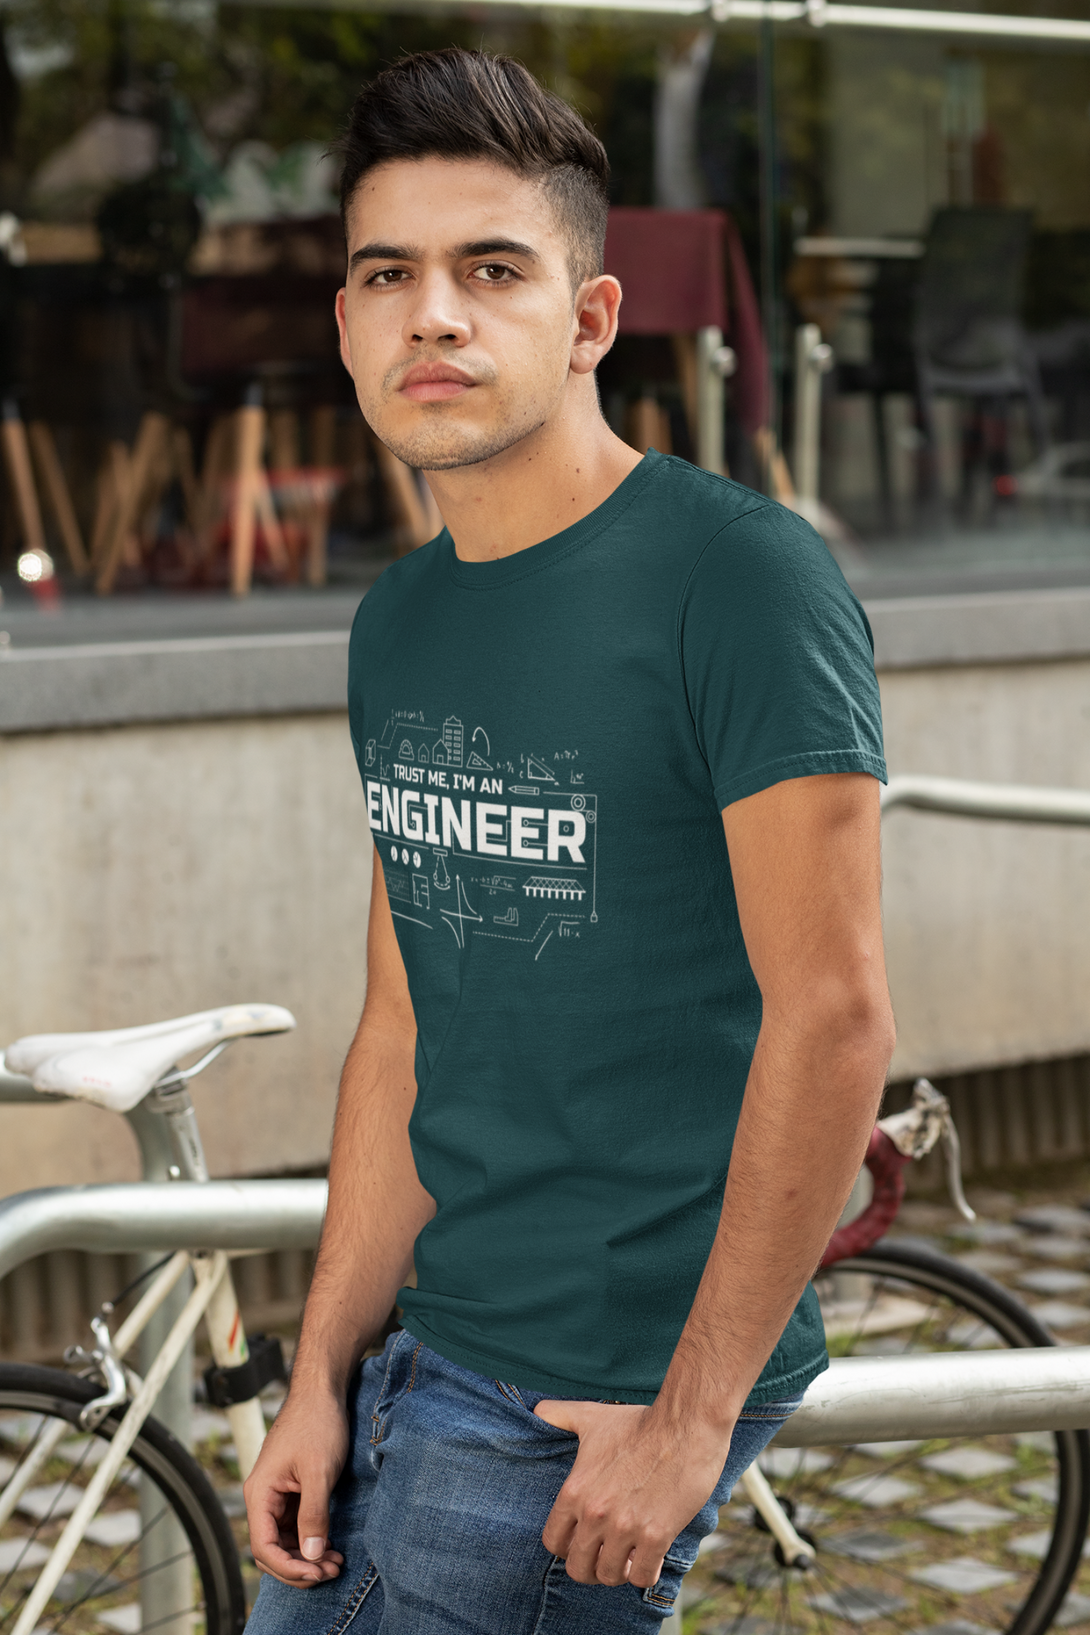 Trust Me, I'M An Engineer Printed T-Shirt For Men - WowWaves - 5